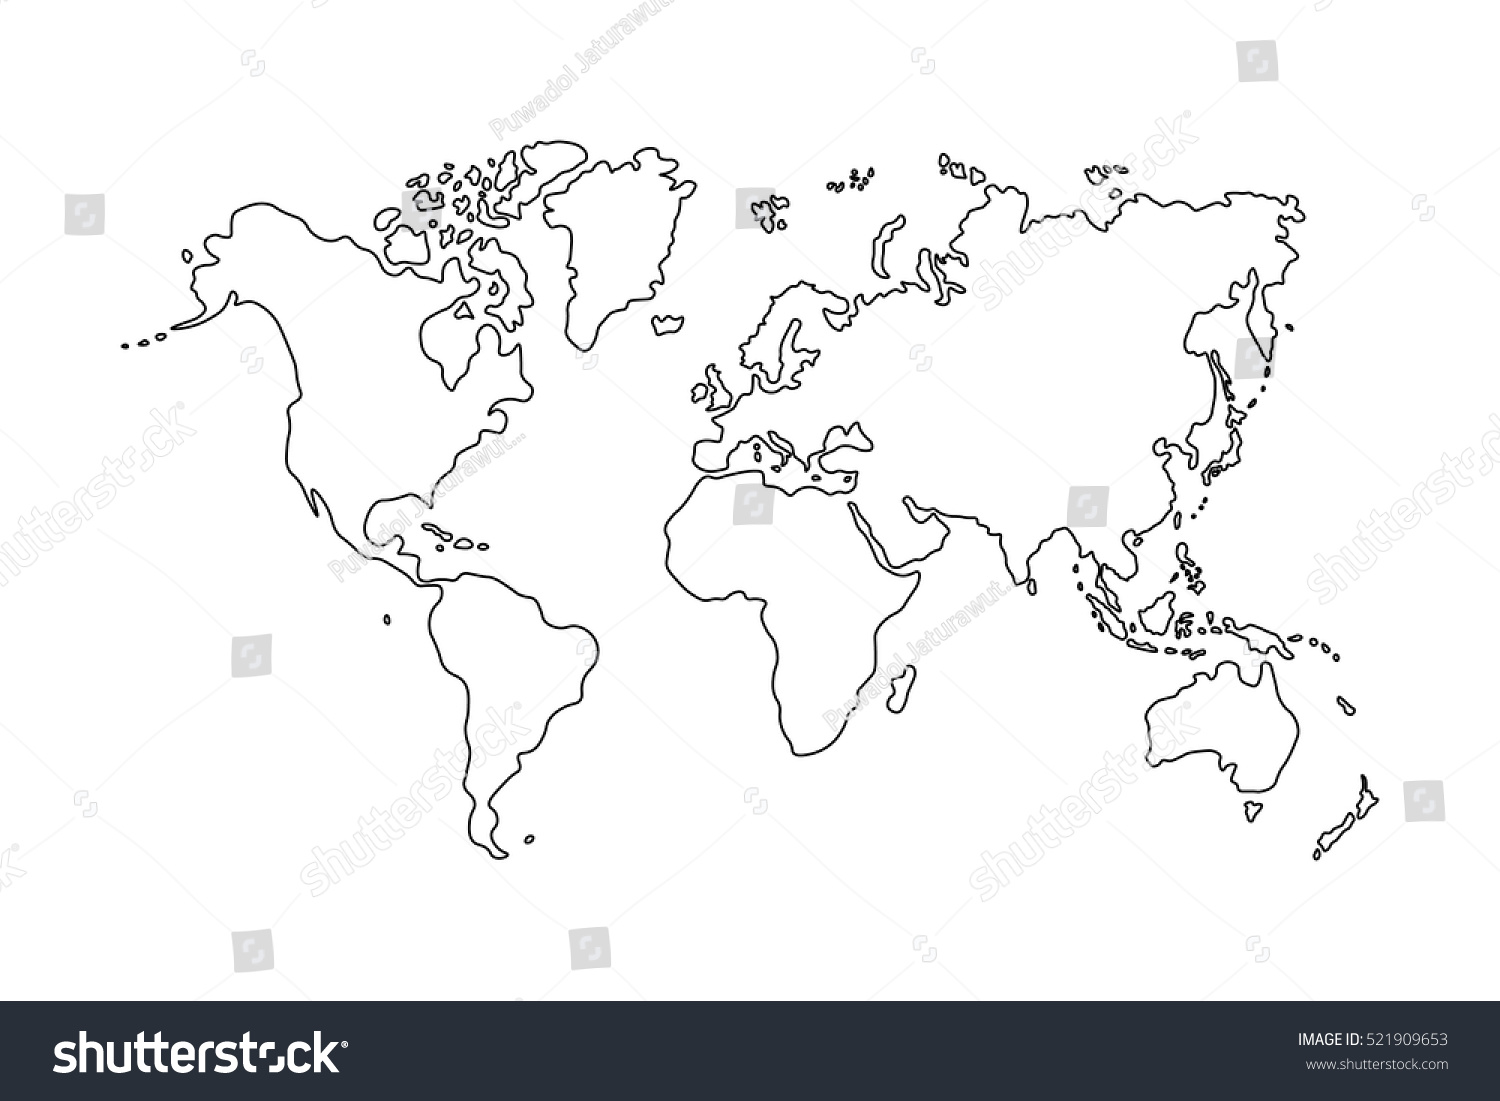 Outline Of World Map On White Background Stock Vector 521909653 ...